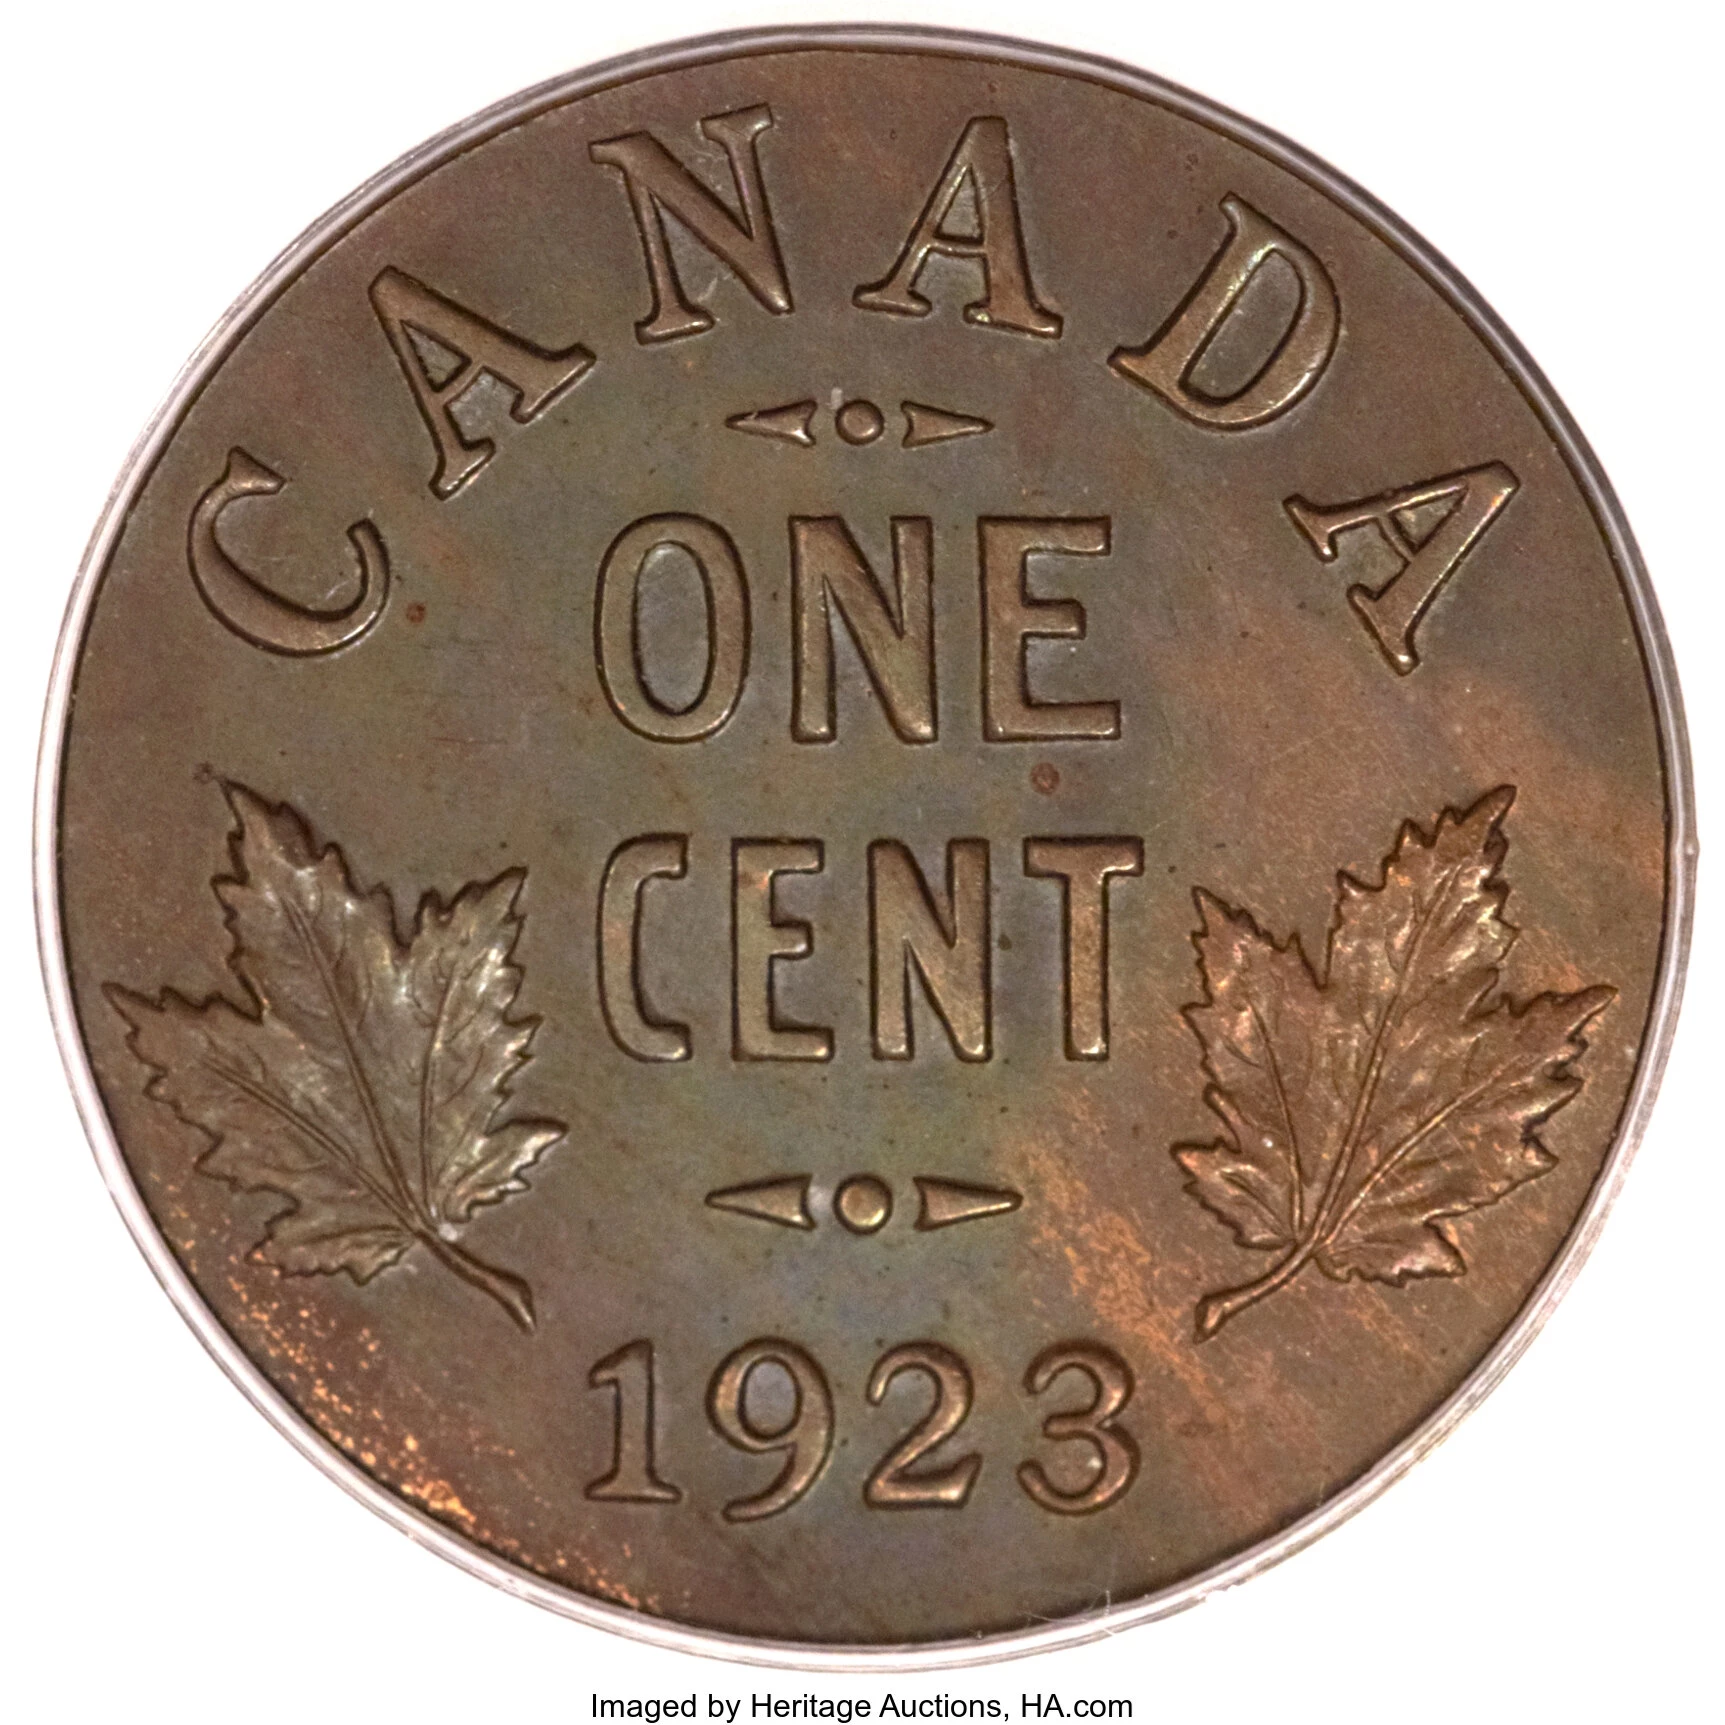 Coins and Canada - 1 cent 1920 - Proof, Proof-like, Specimen